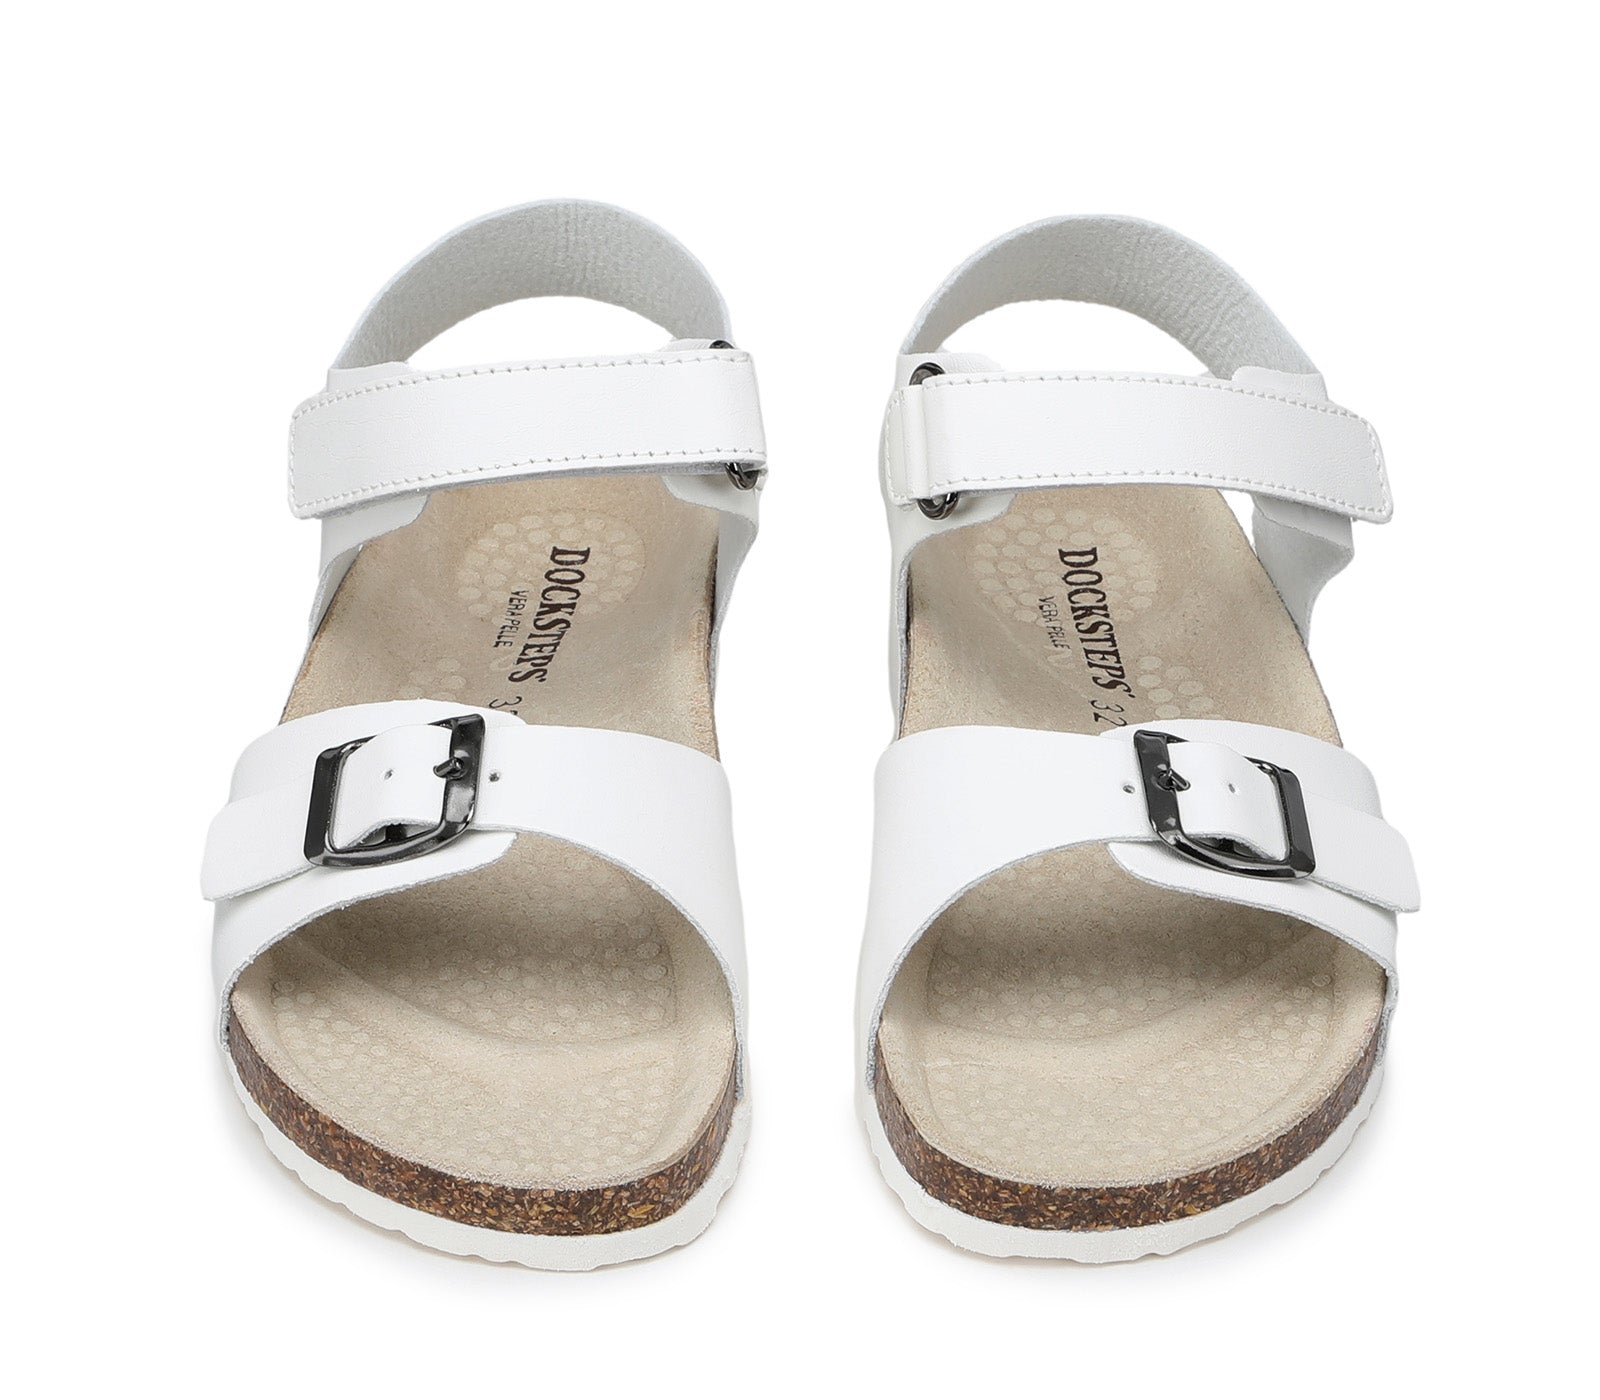 Children's White Sandals with Velcro Closure and Contoured Insole